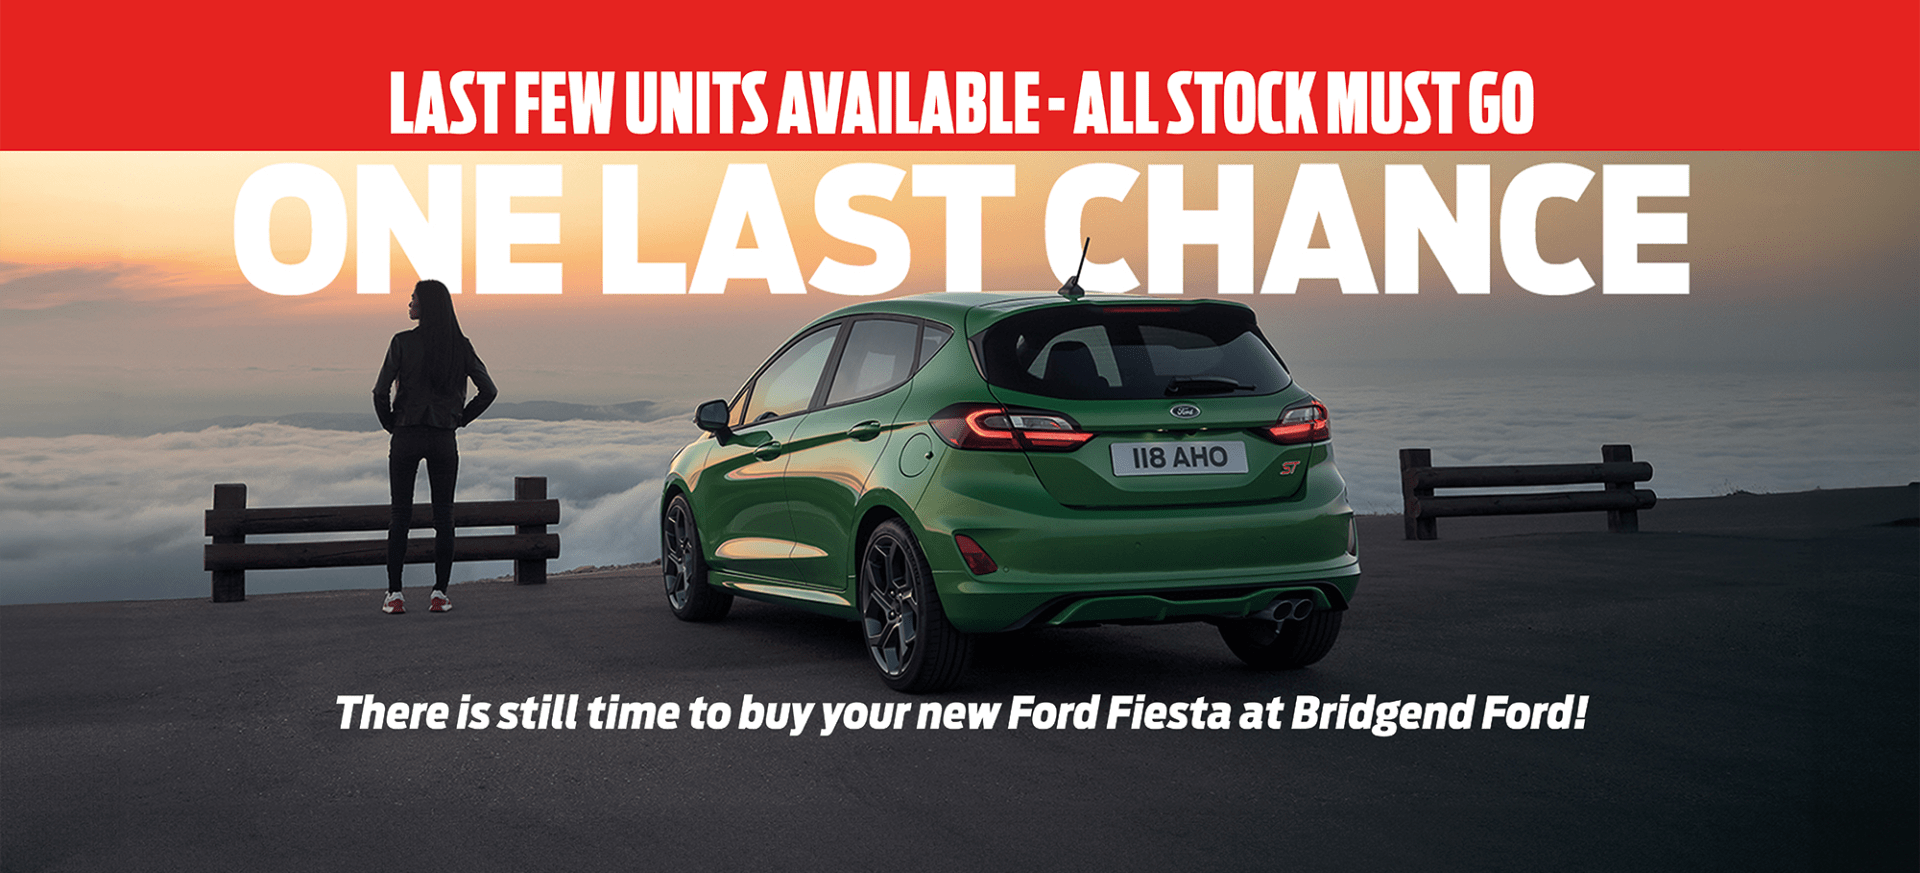 Ford Fiesta Hot Offers